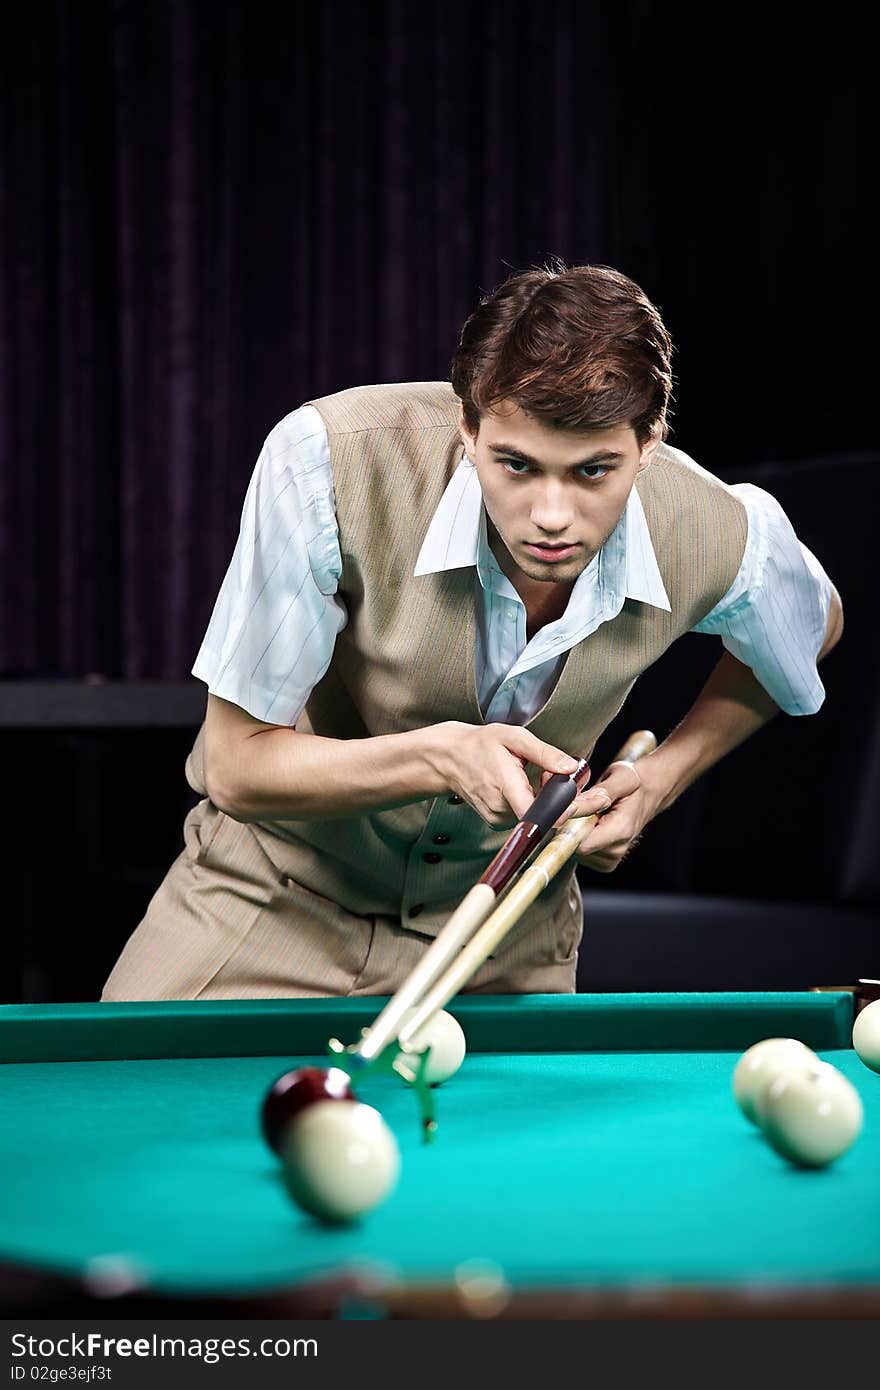 The young attractive well dressed man plays billiards. The young attractive well dressed man plays billiards